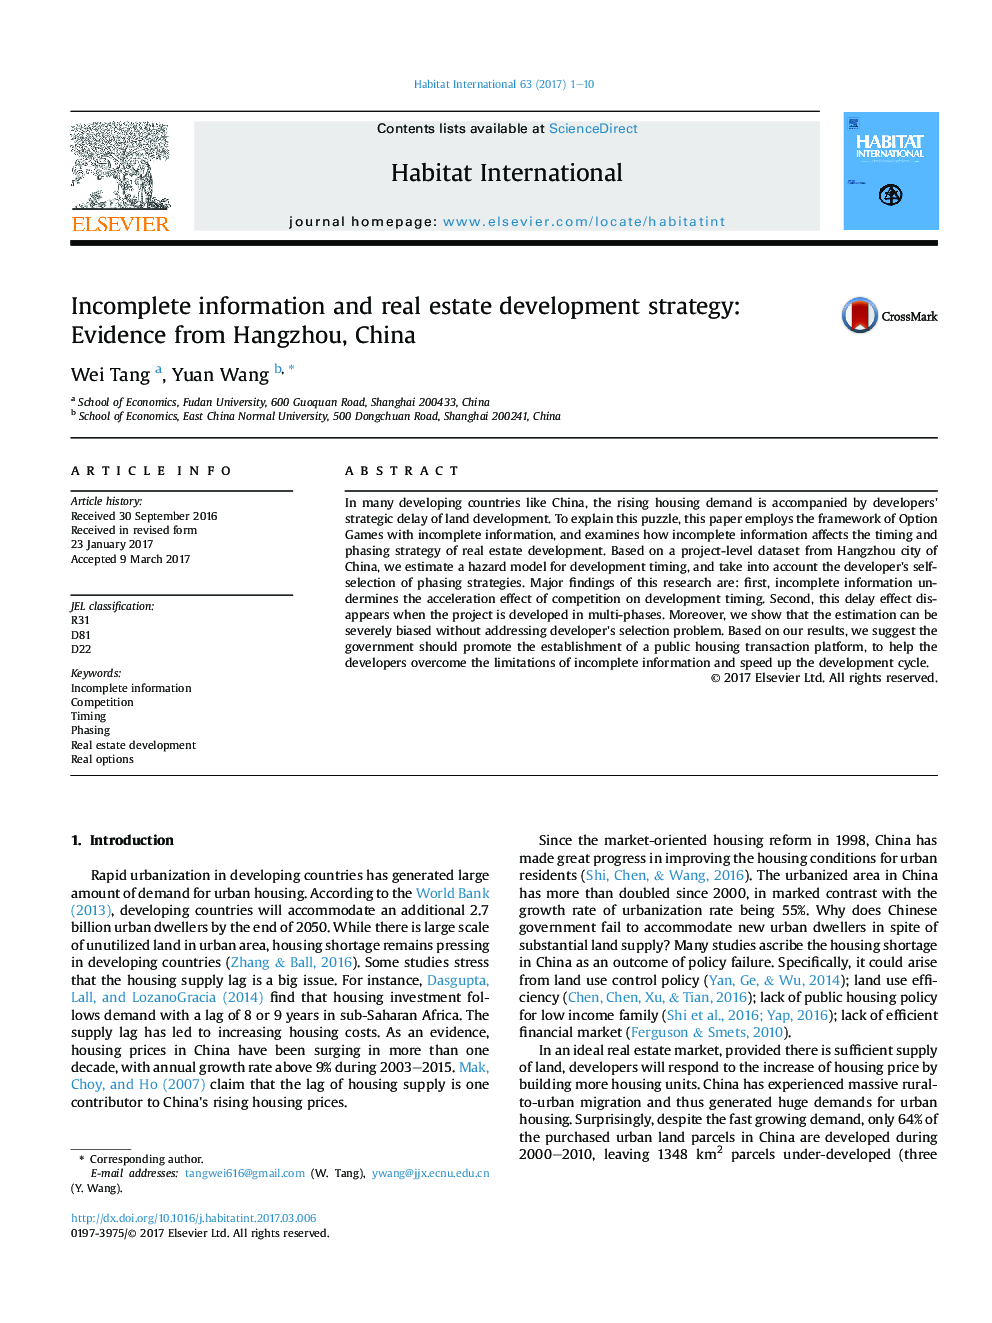 Incomplete information and real estate development strategy: Evidence from Hangzhou, China